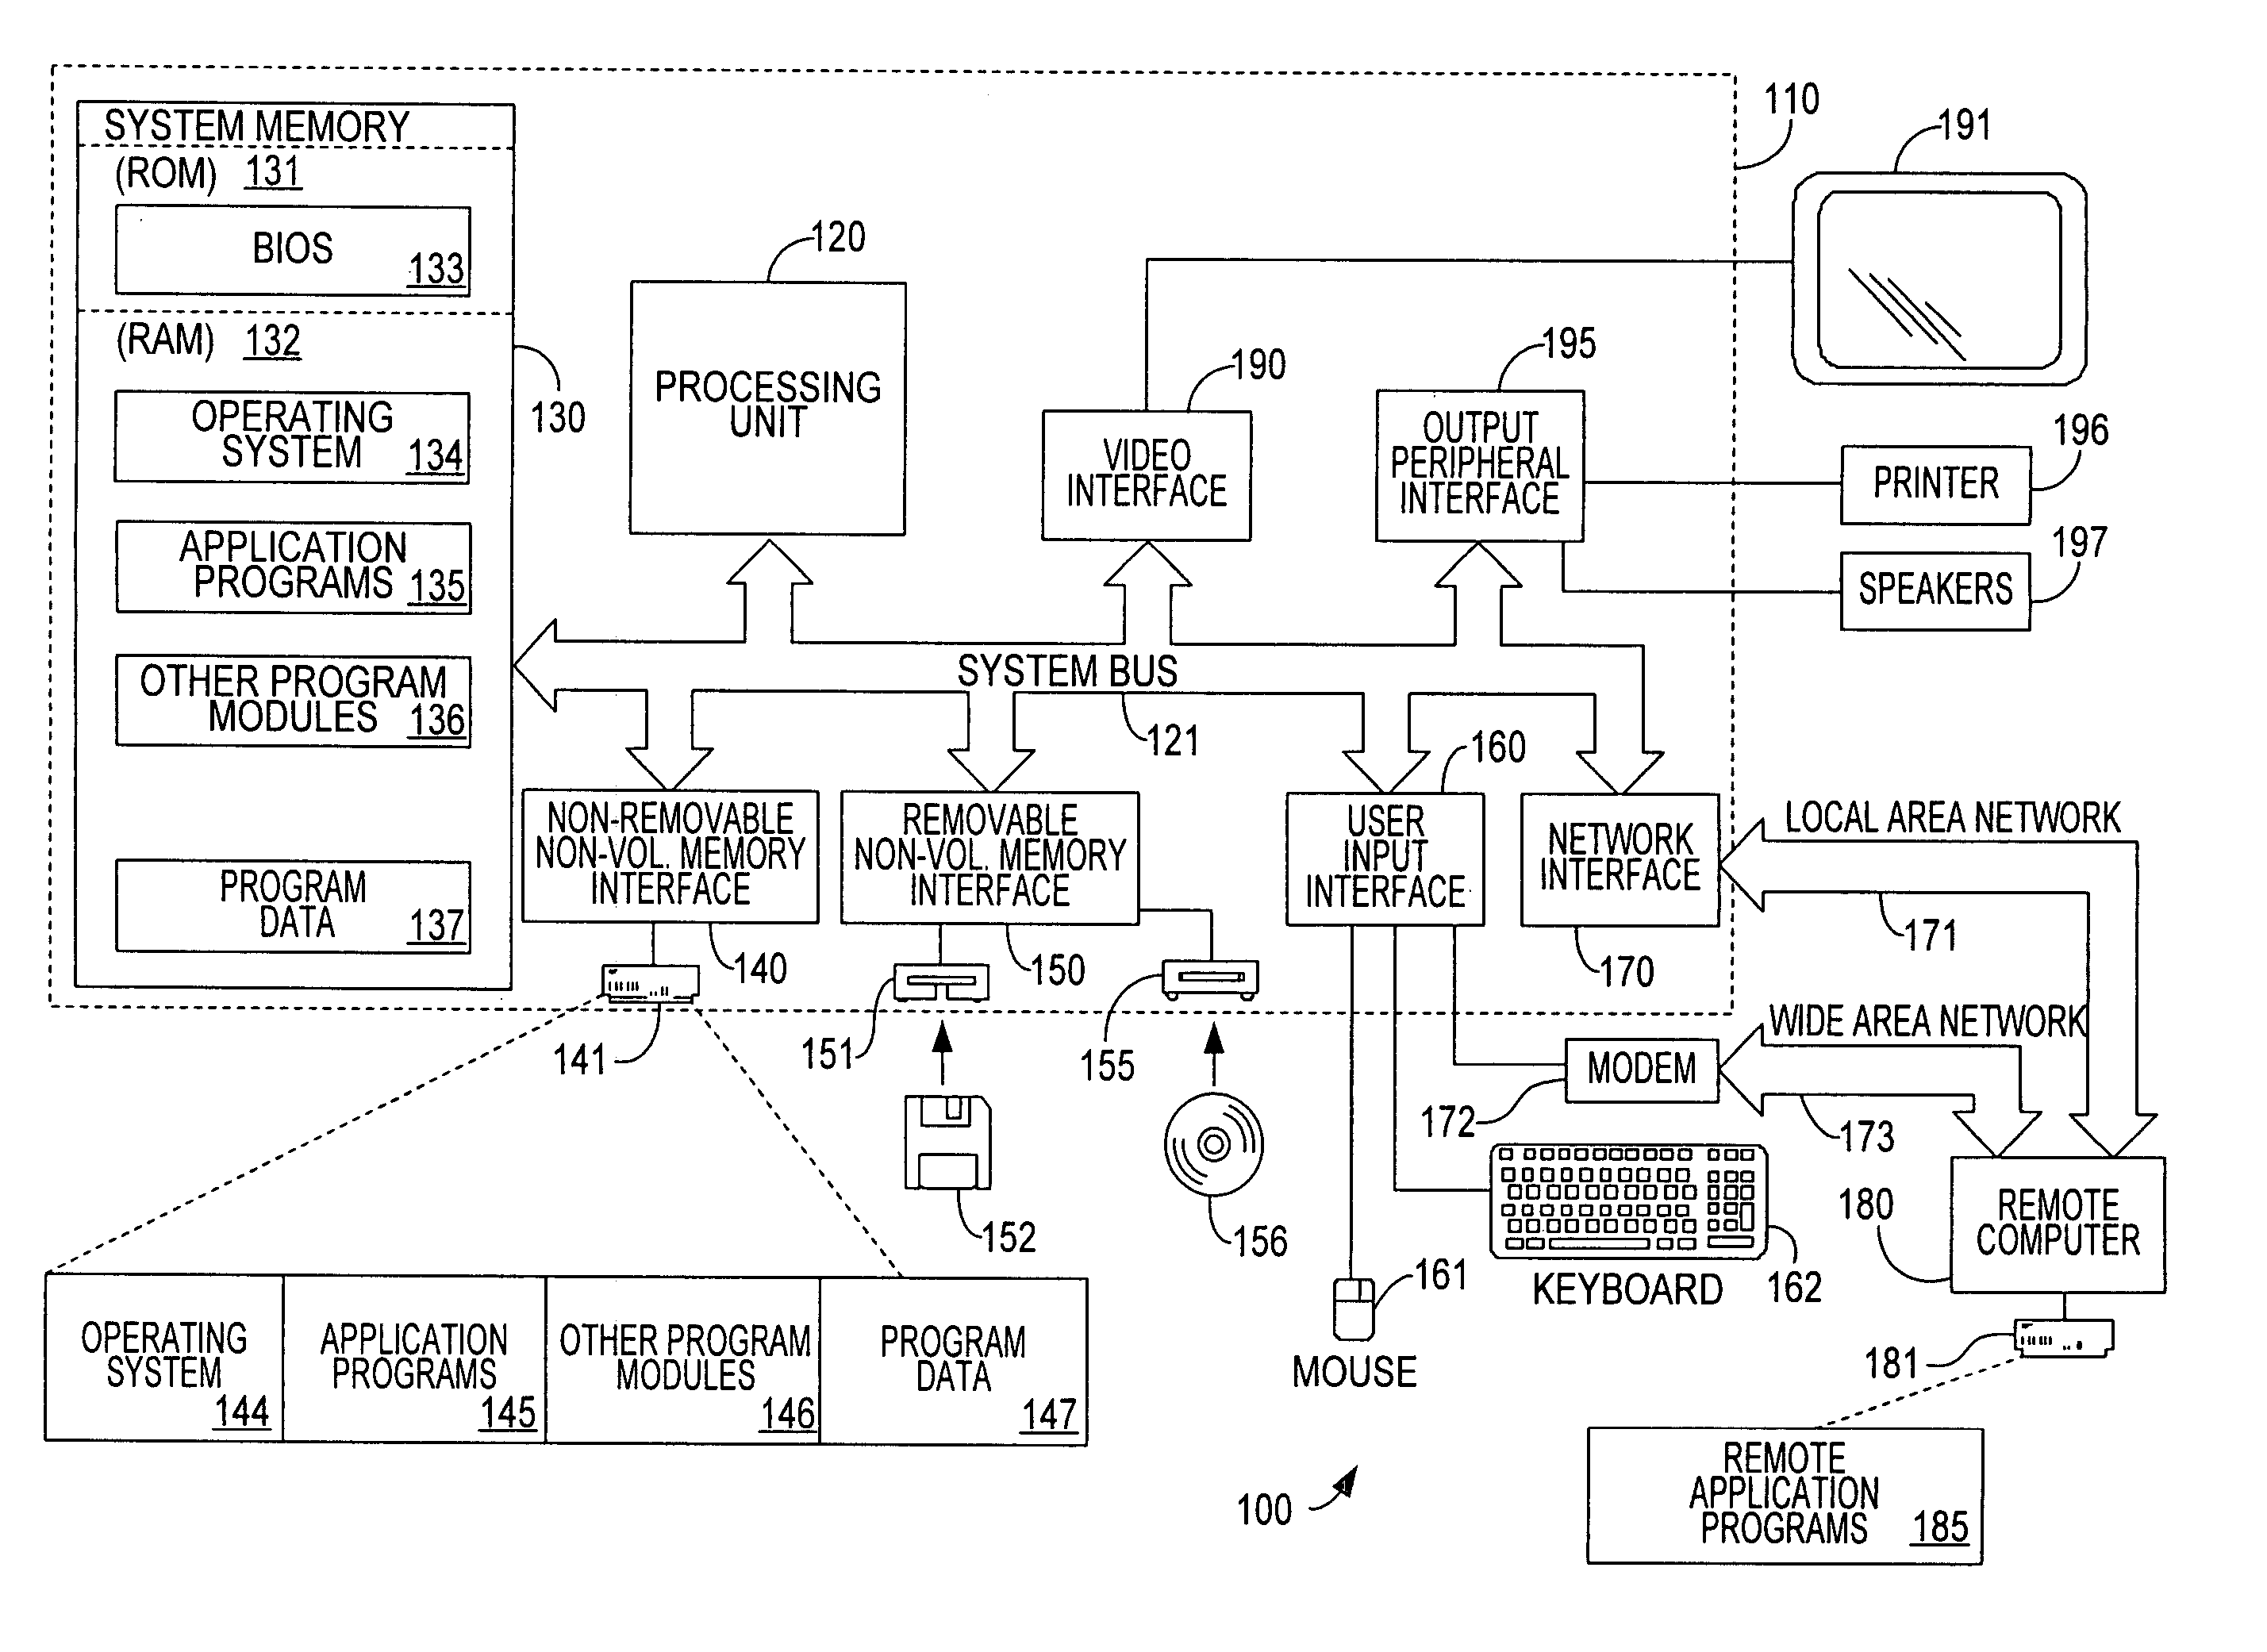 Method for efficiently mapping error messages to unique identifiers